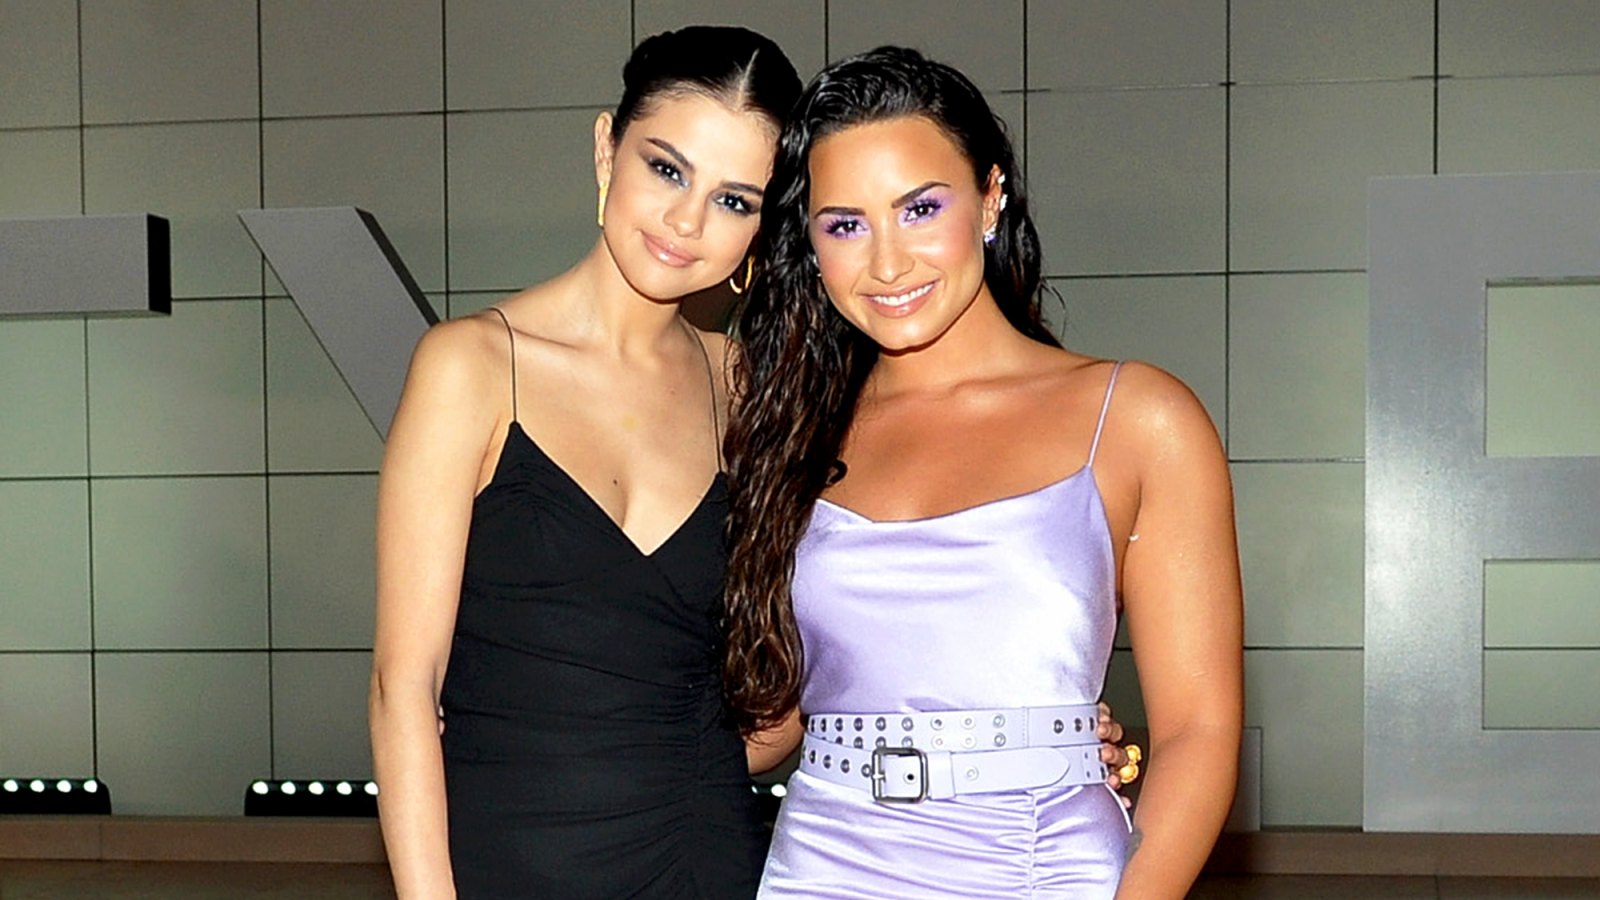 Selena Gomez and Demi Lovato attend the Third Annual "InStyle Awards" presented by InStyle at The Getty Center on October 23, 2017 in Los Angeles, California.